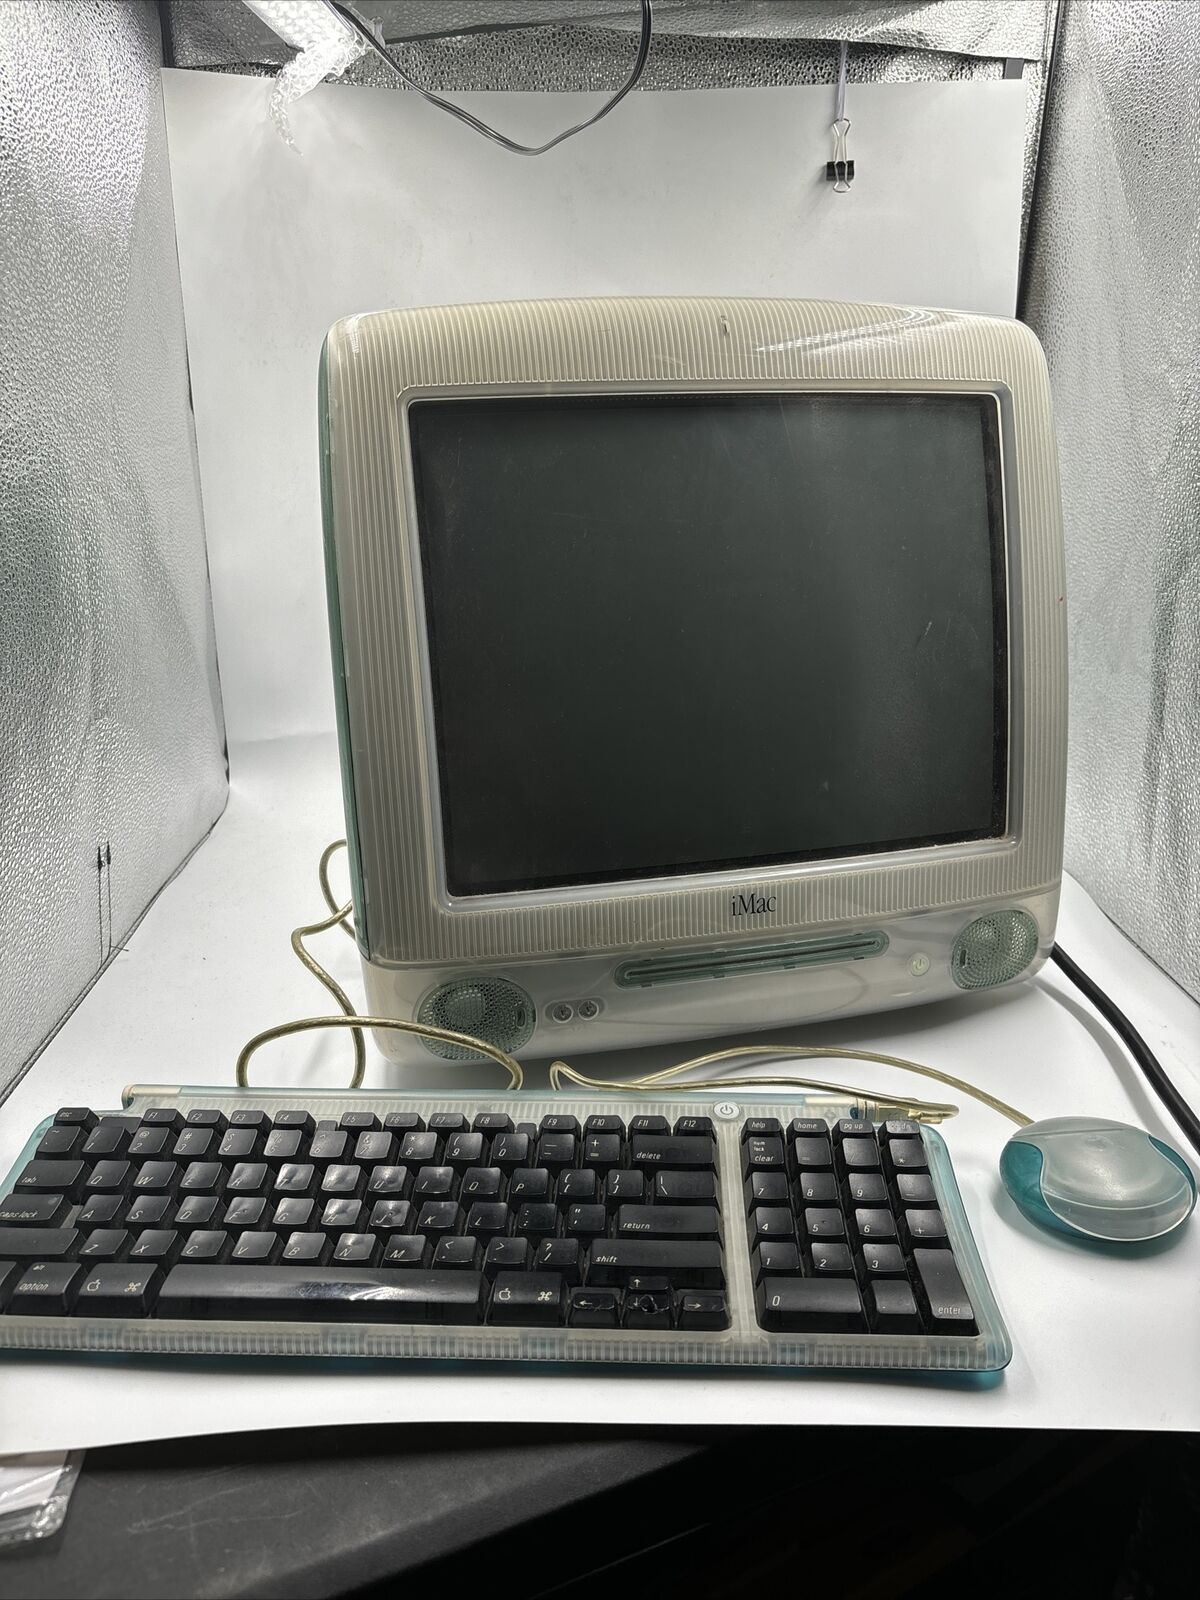 VTG Apple iMac G3 128MB 450MHz 2004 Power PC Tested, Working W/Keyboard & Mouse